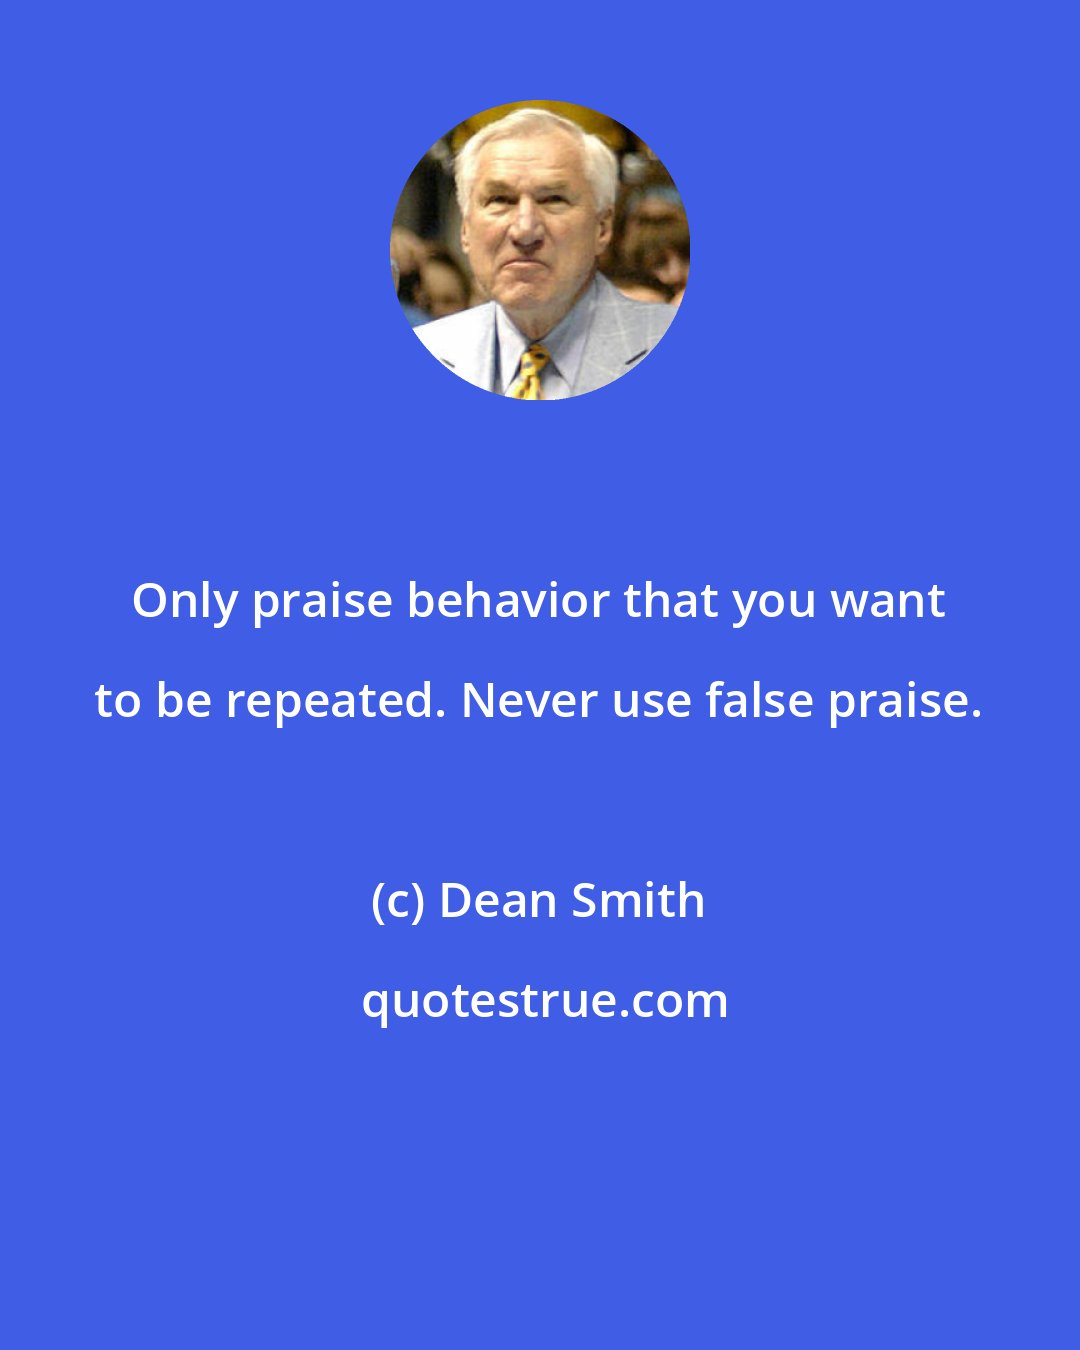 Dean Smith: Only praise behavior that you want to be repeated. Never use false praise.